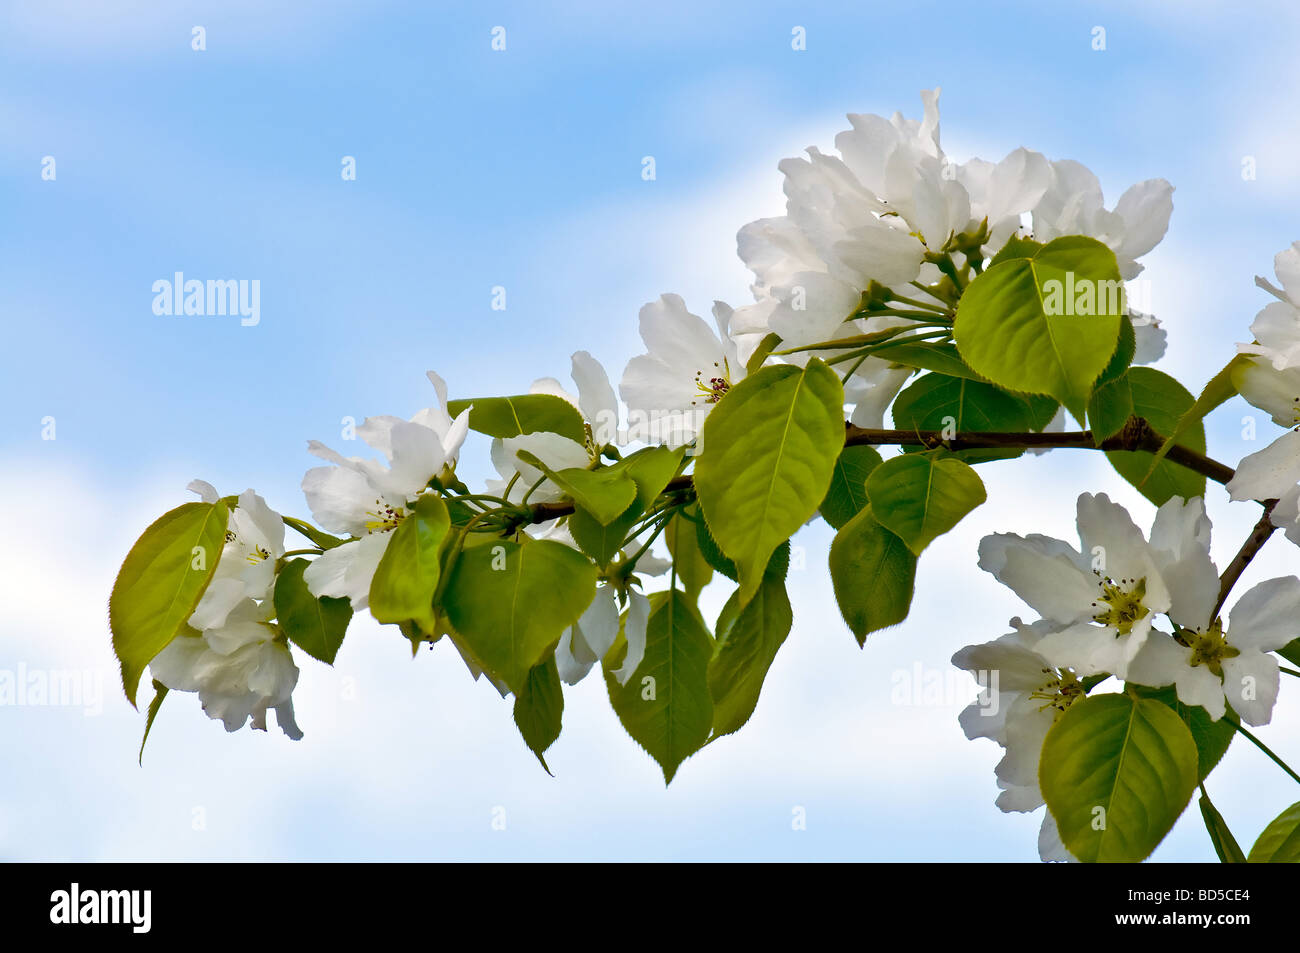 Blossoms apple tree flowers on blue Stock Photo